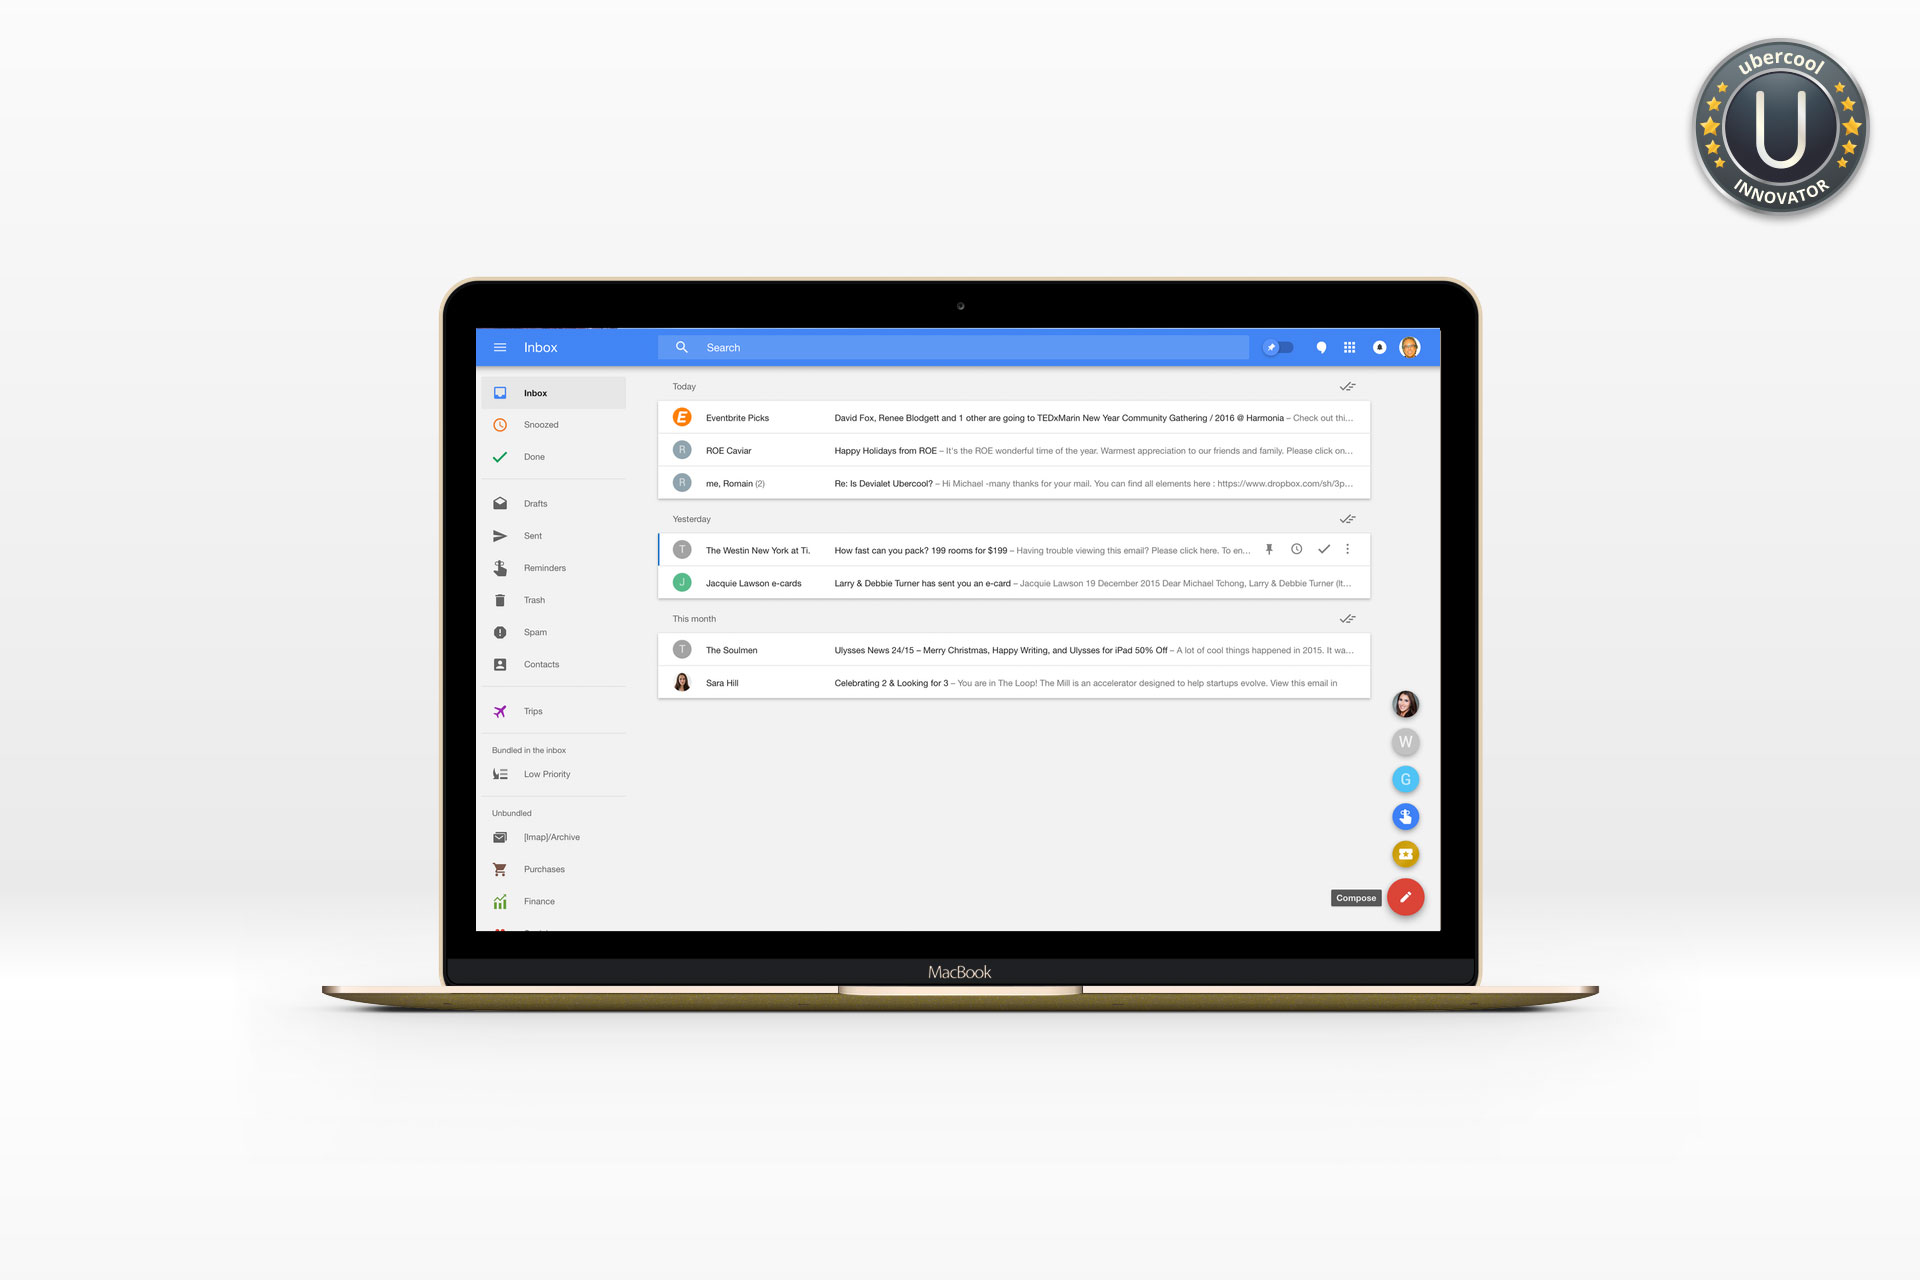 Google Inbox email application